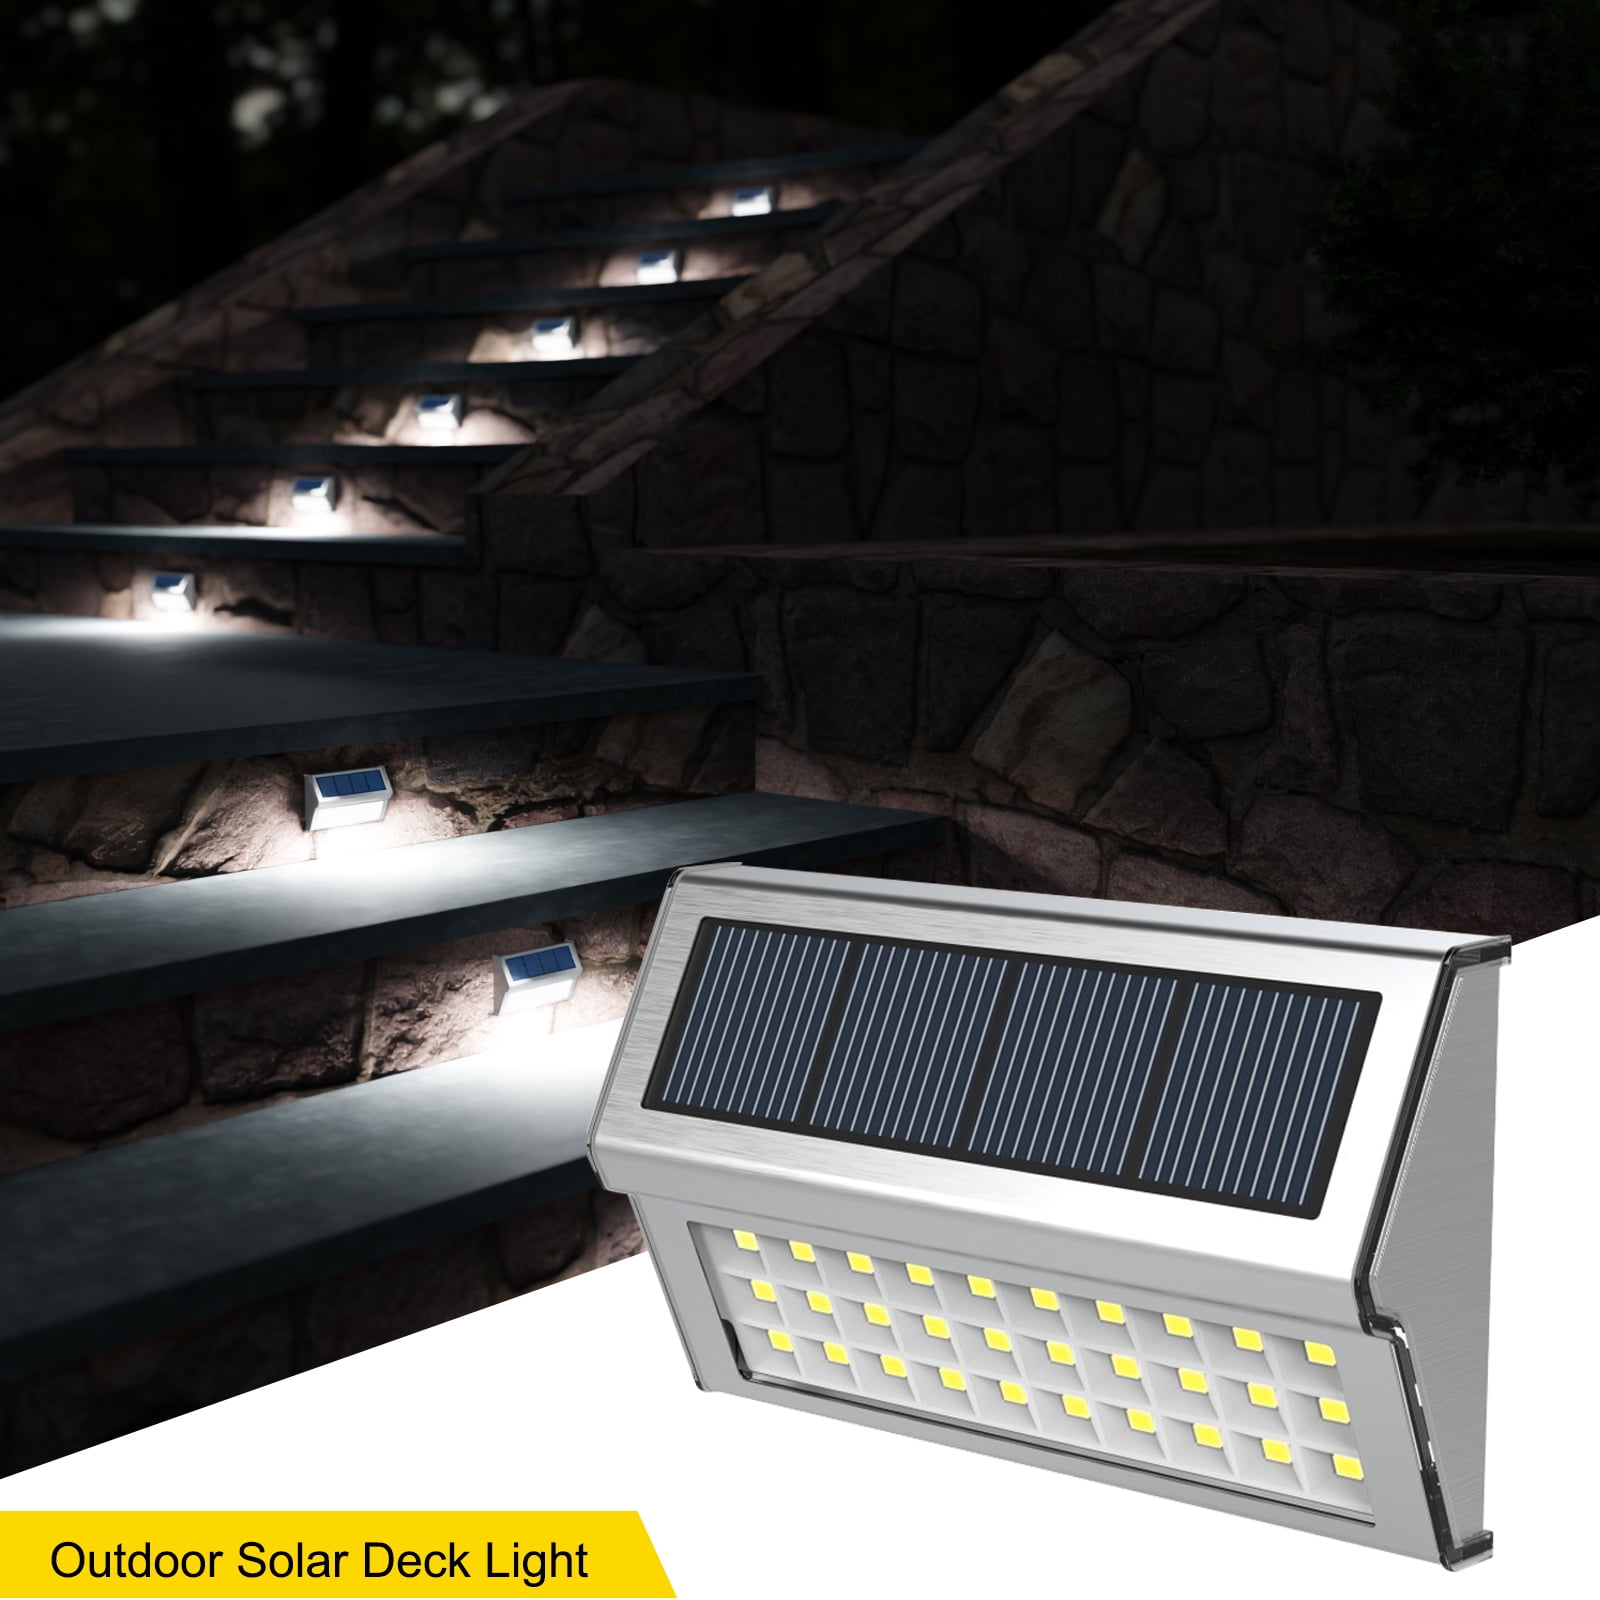 Pack of 4 JSOT Outdoor Solar Gutter Lights Solar Powered Fence Light Waterproof LED Wall Lamps for Roof Eaves Railing Deck Stairs Corridor White Light 